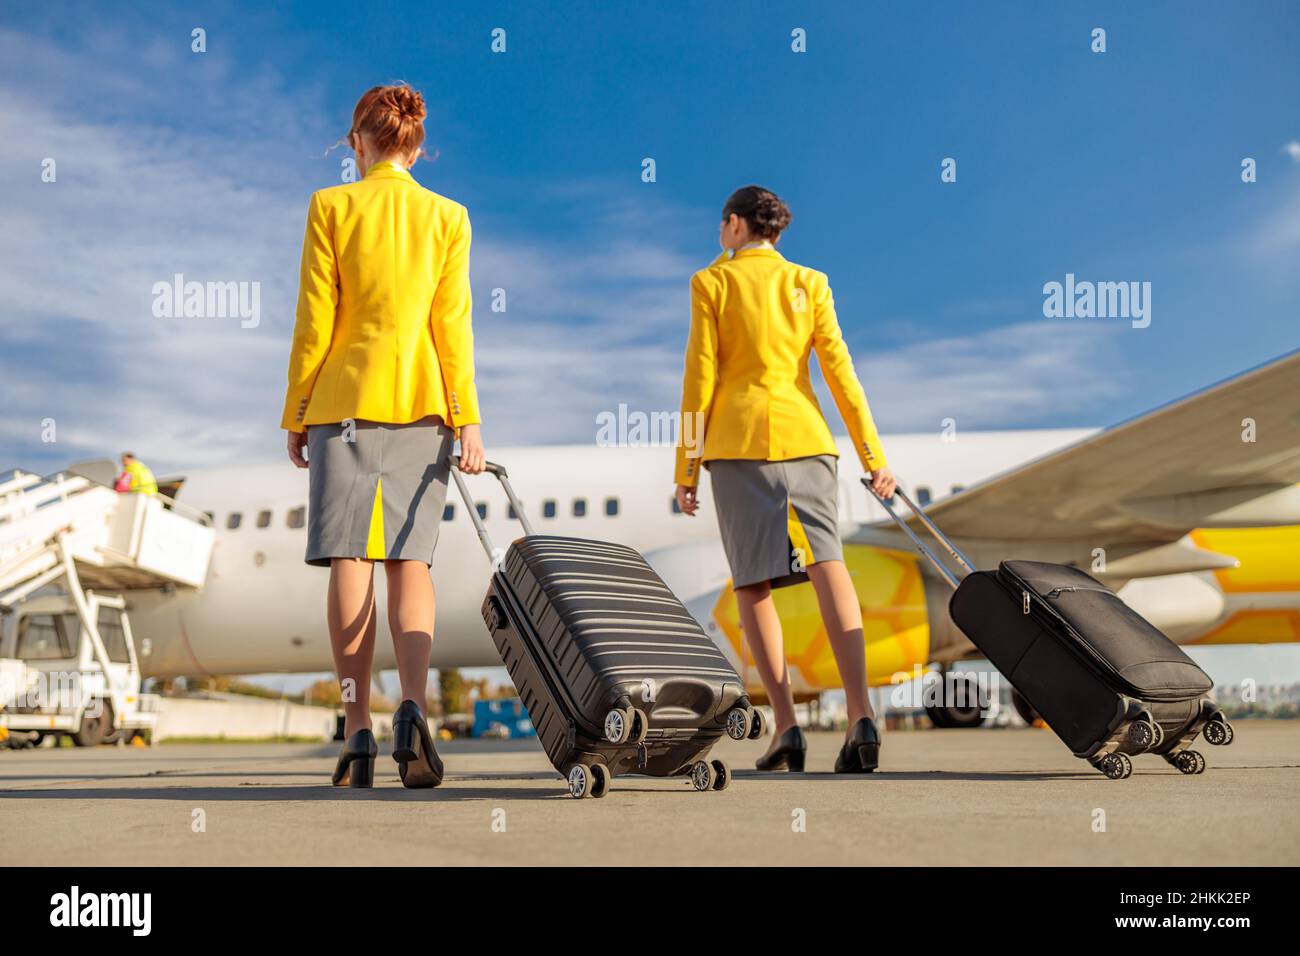 Back view of two women flight attendants carrying trolley luggage bags while walking down airfield Stock Photo